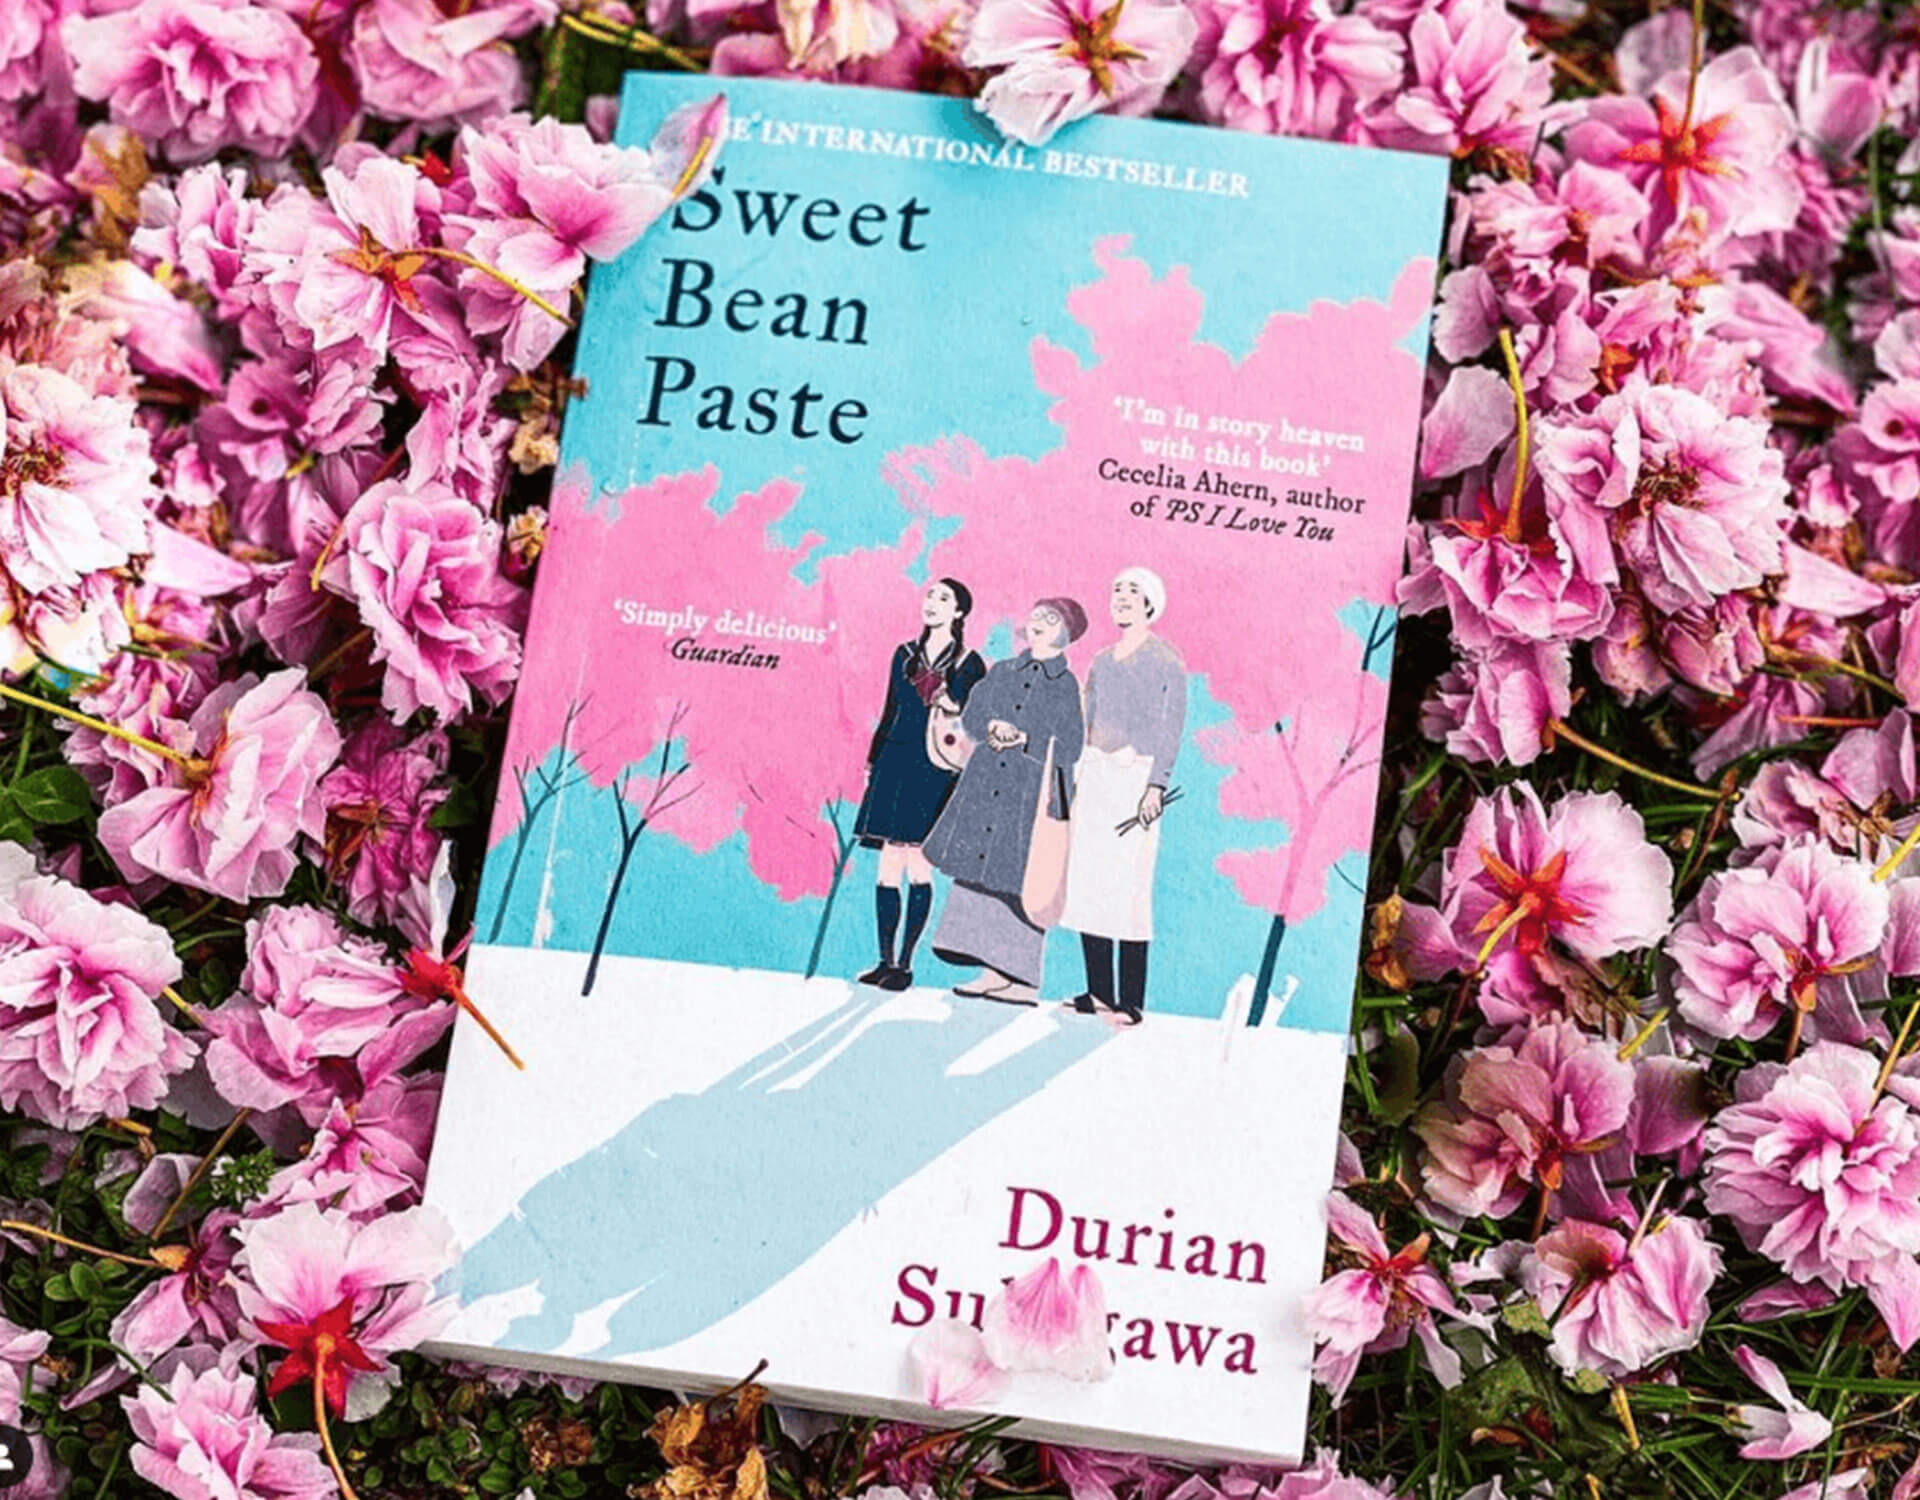 Durian Sukegawa's 'Sweet Bean Paste' book cover by Shakespeare Sistah